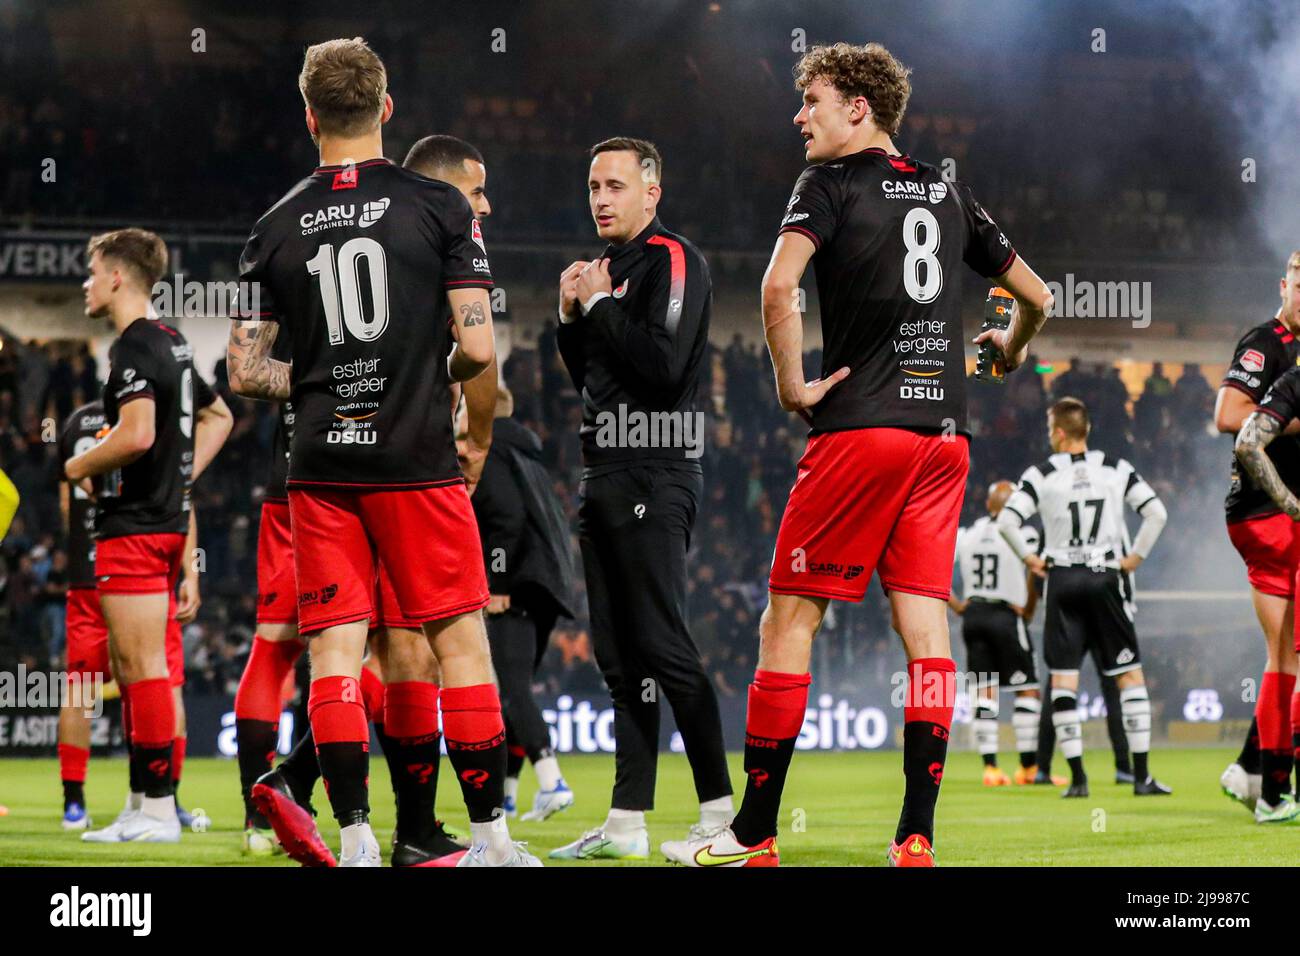 ALMELO, NETHERLANDS - MAY 21: players of Excelsior during the Dutch Eredivisie relegation/promotion playoffs match between Heracles Almelo and Excelsior Rotterdam at Erve Asito on May 21, 2022 in Almelo, Netherlands (Photo by Peter Lous/Orange Pictures) Stock Photo